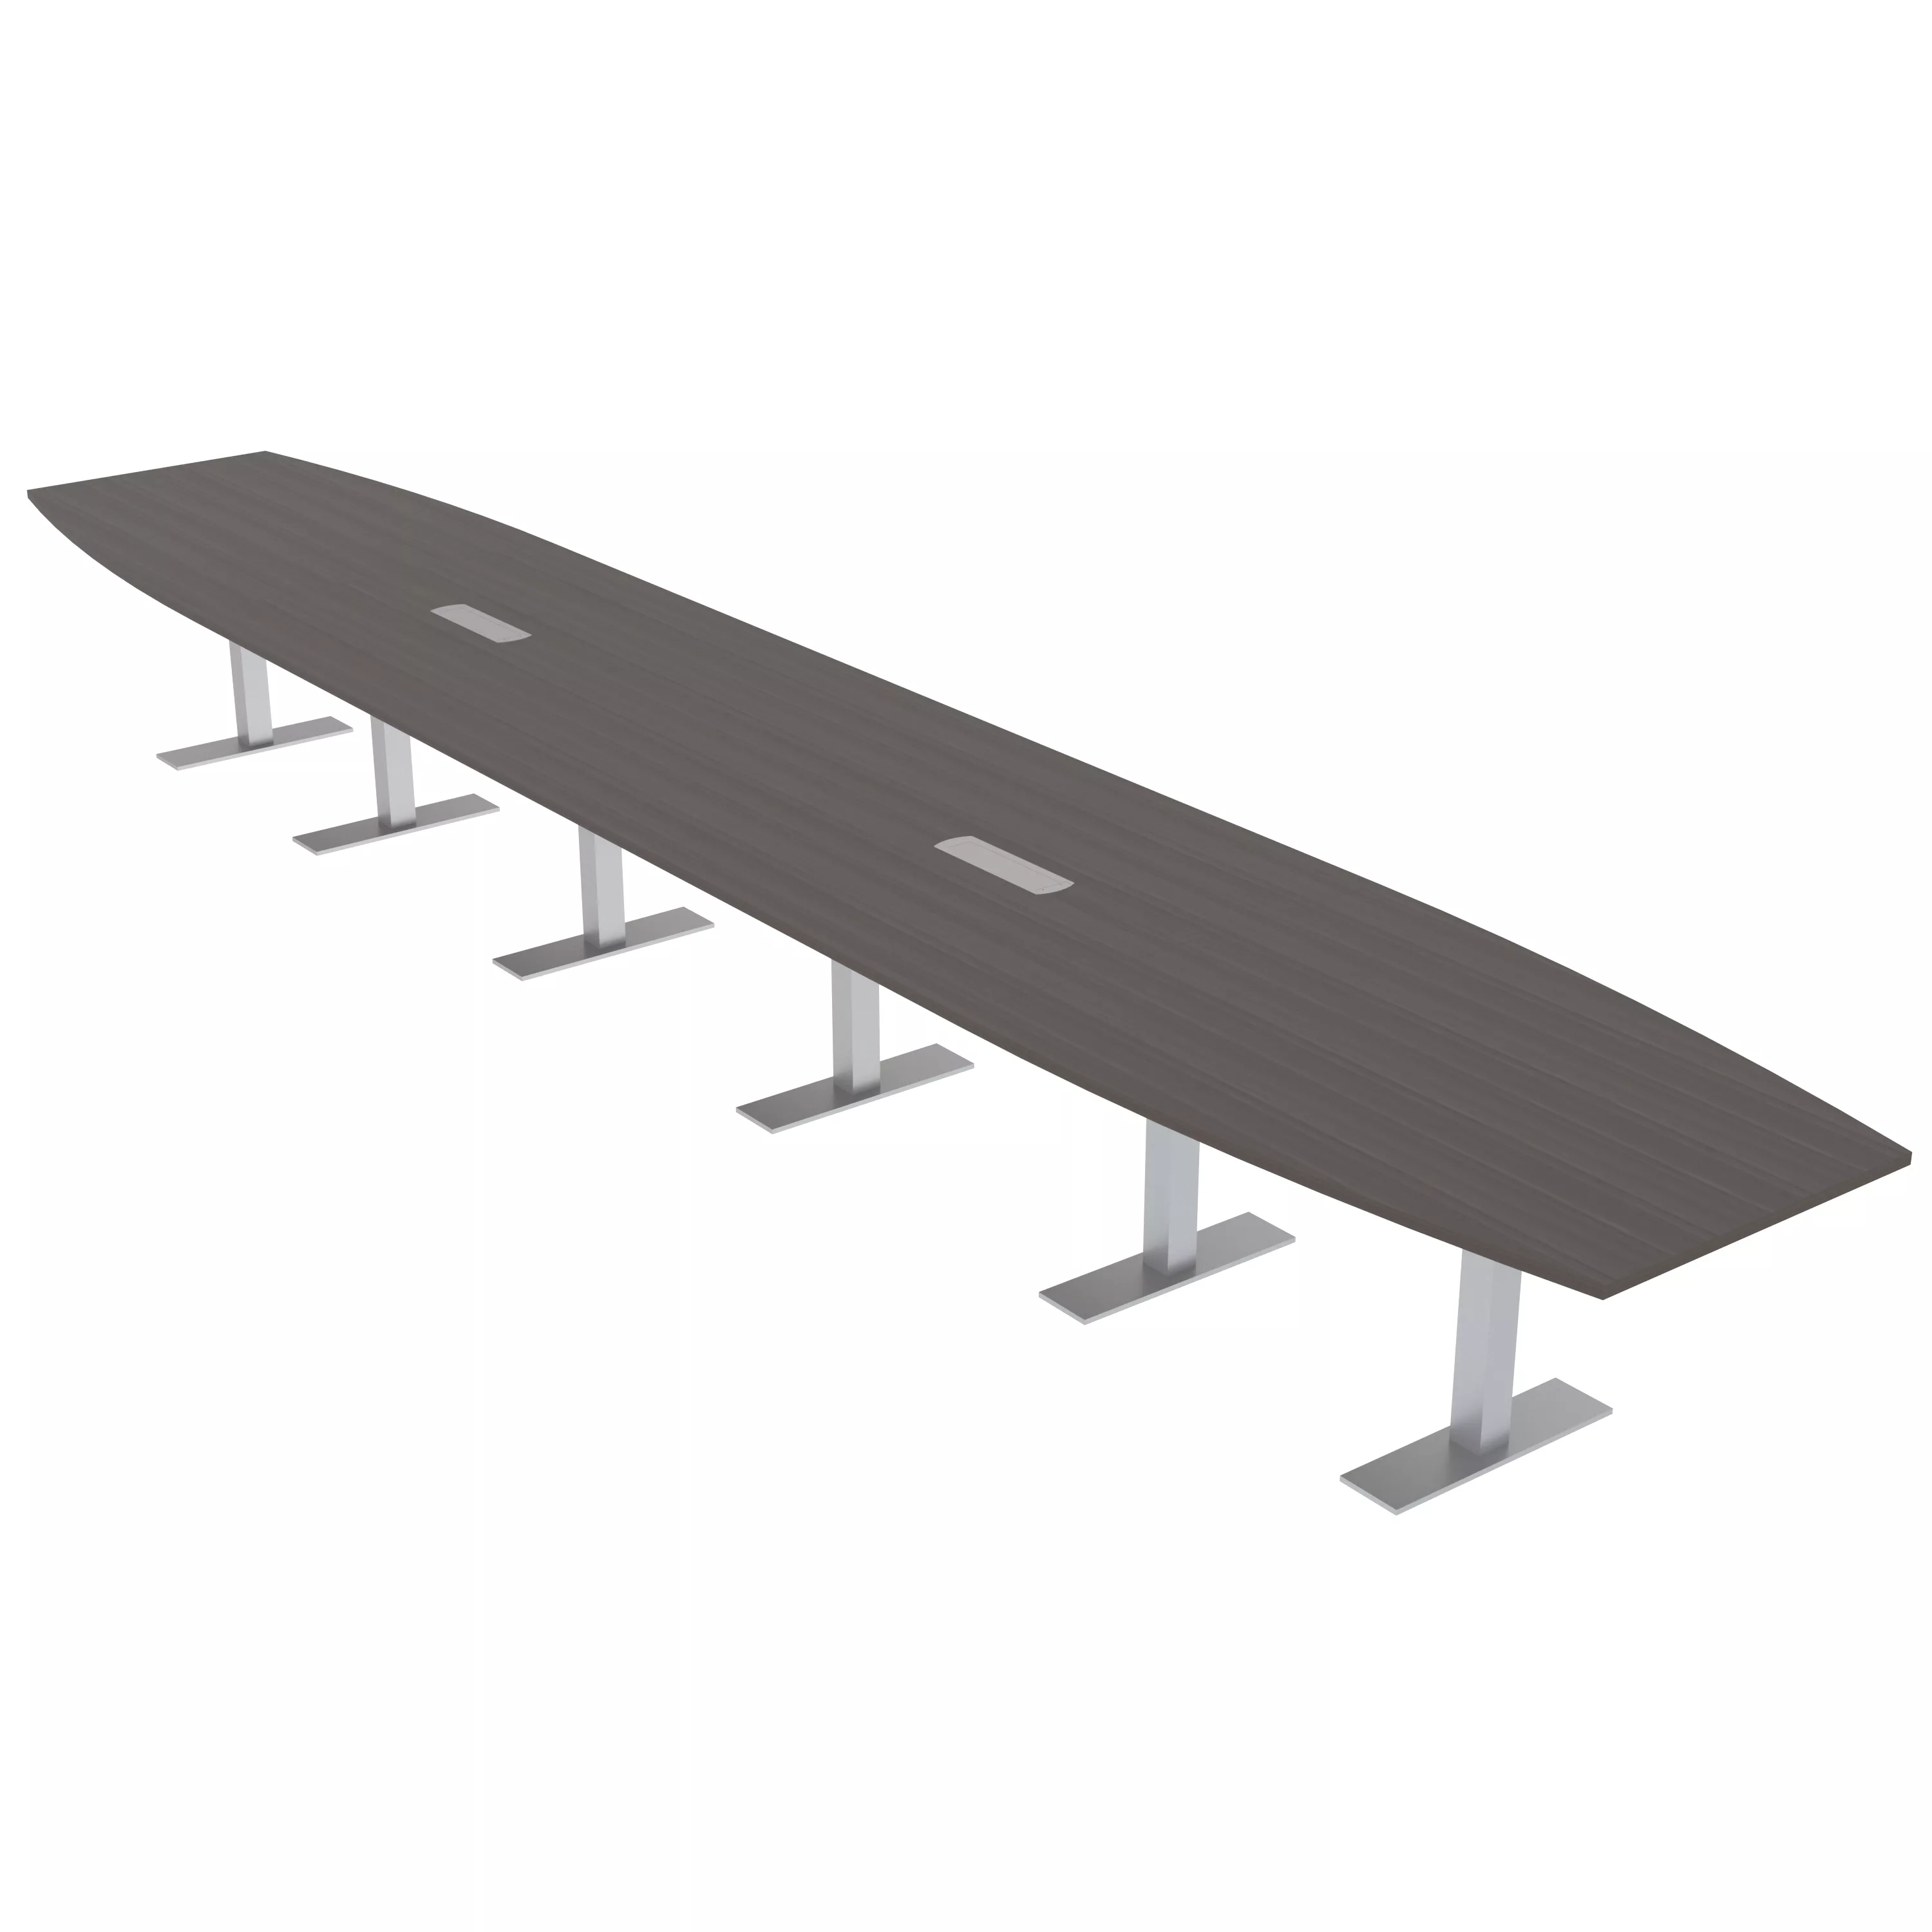 22-foot Boat-shaped Conference Table with T Bases | Harmony Series